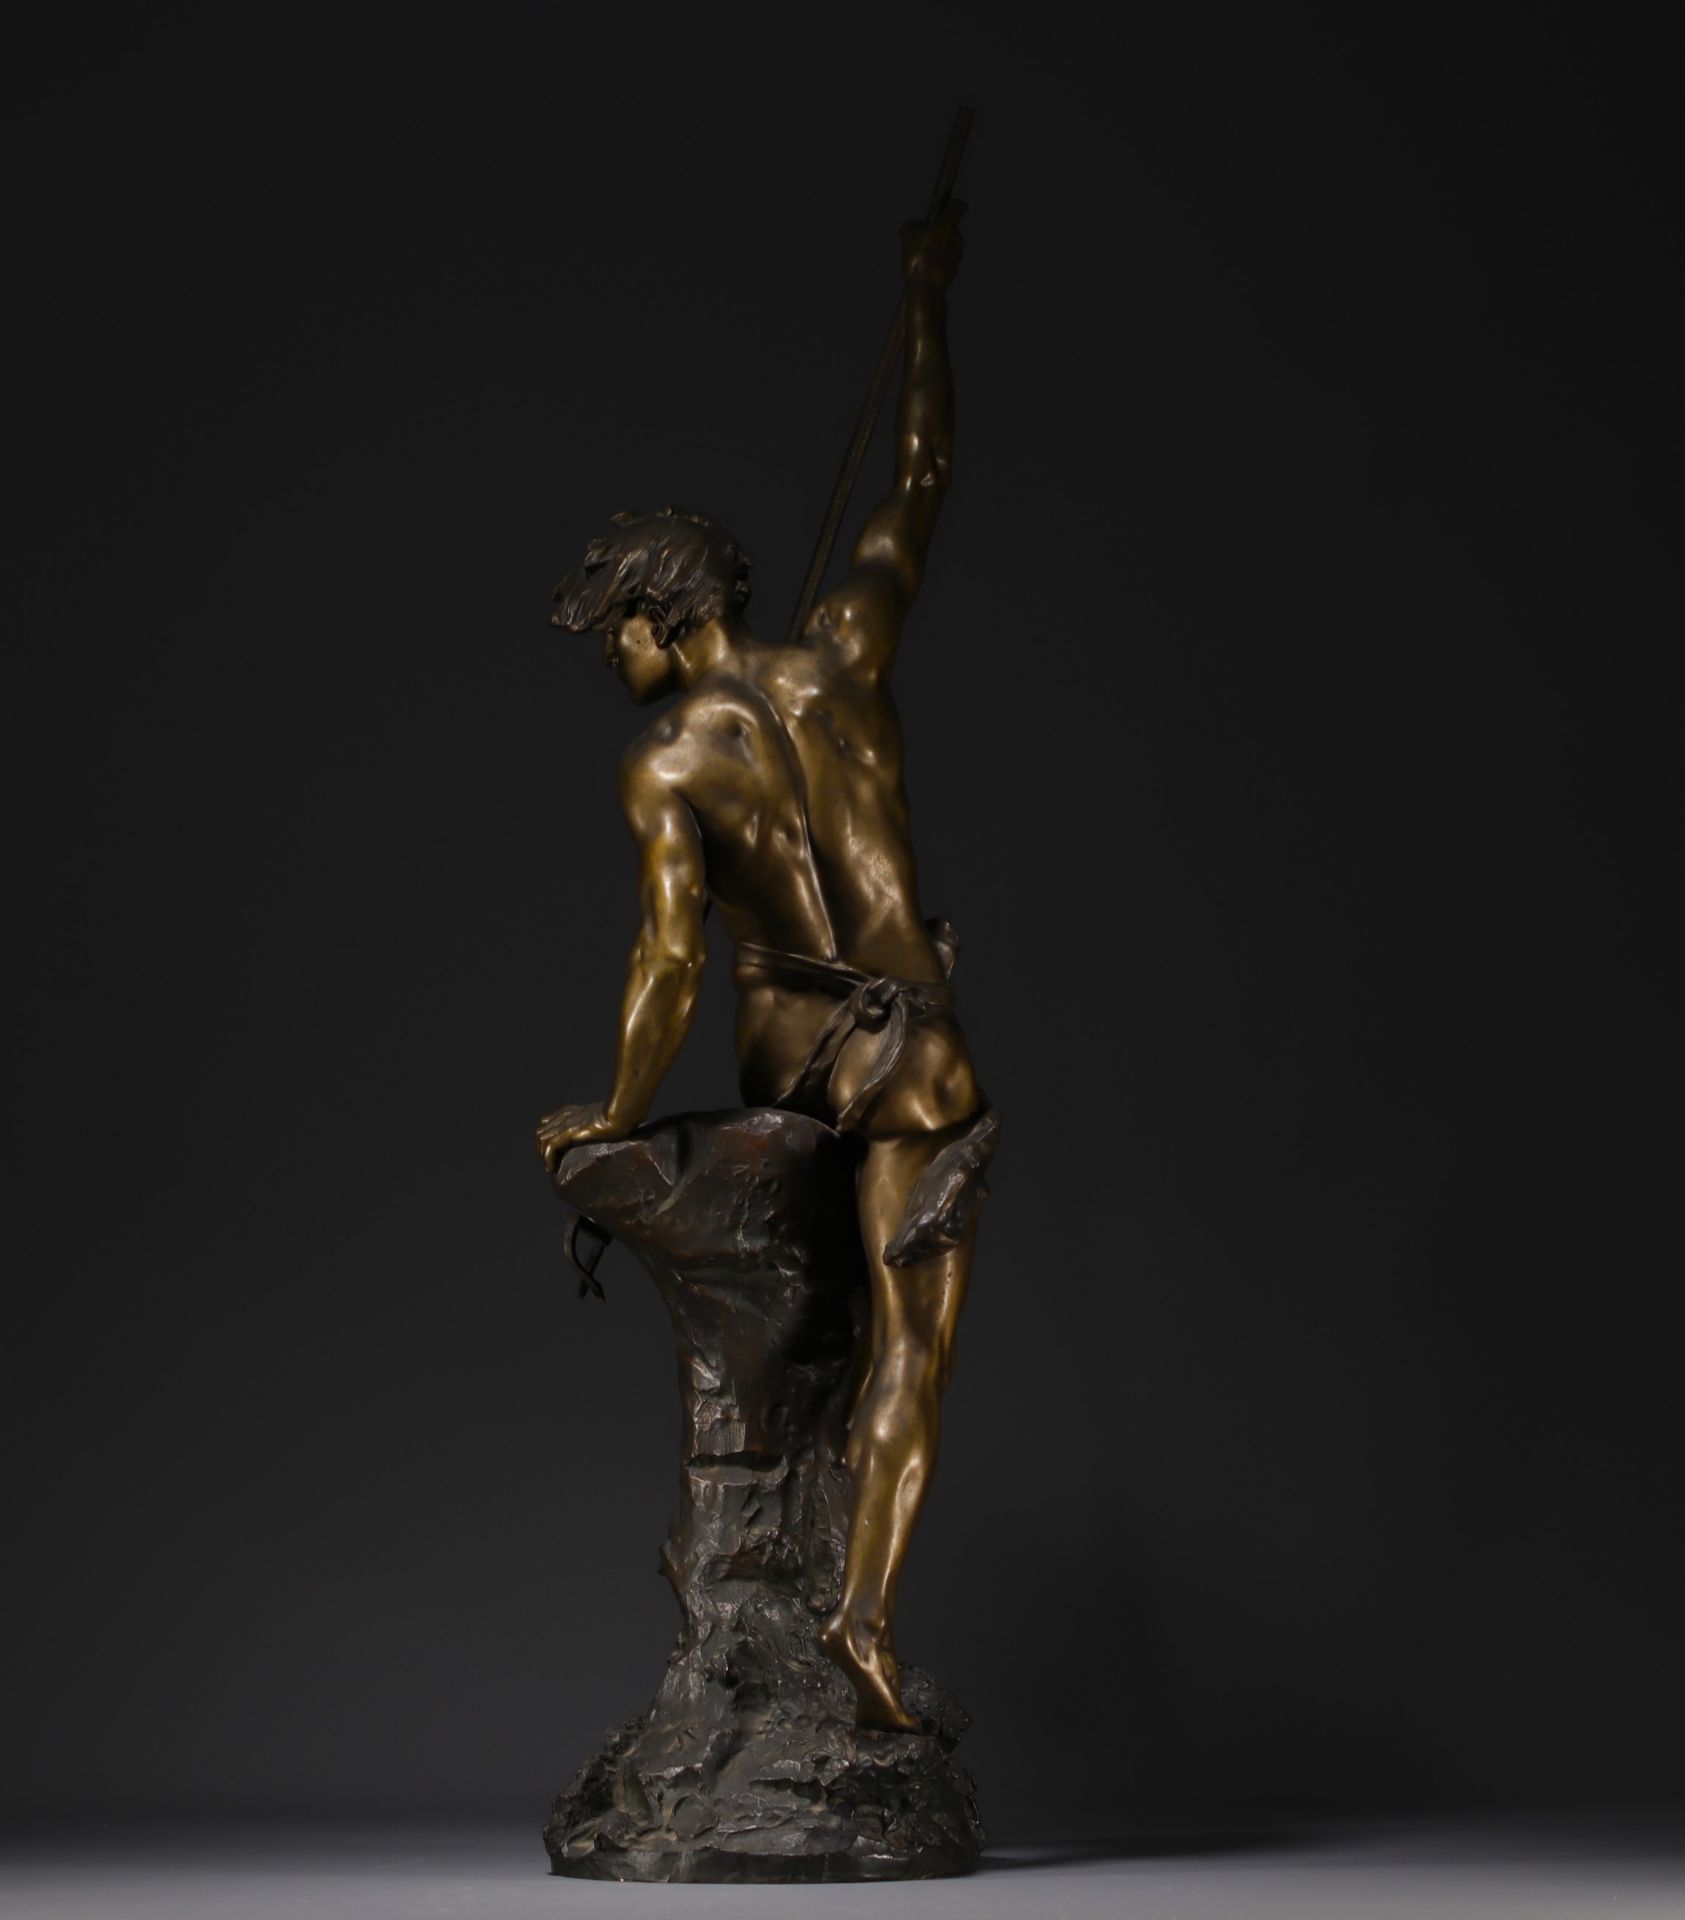 Ernest Justin FERRAND (1846-1932) "The young sinner" Sculpture in chased and patinated bronze. - Image 5 of 7